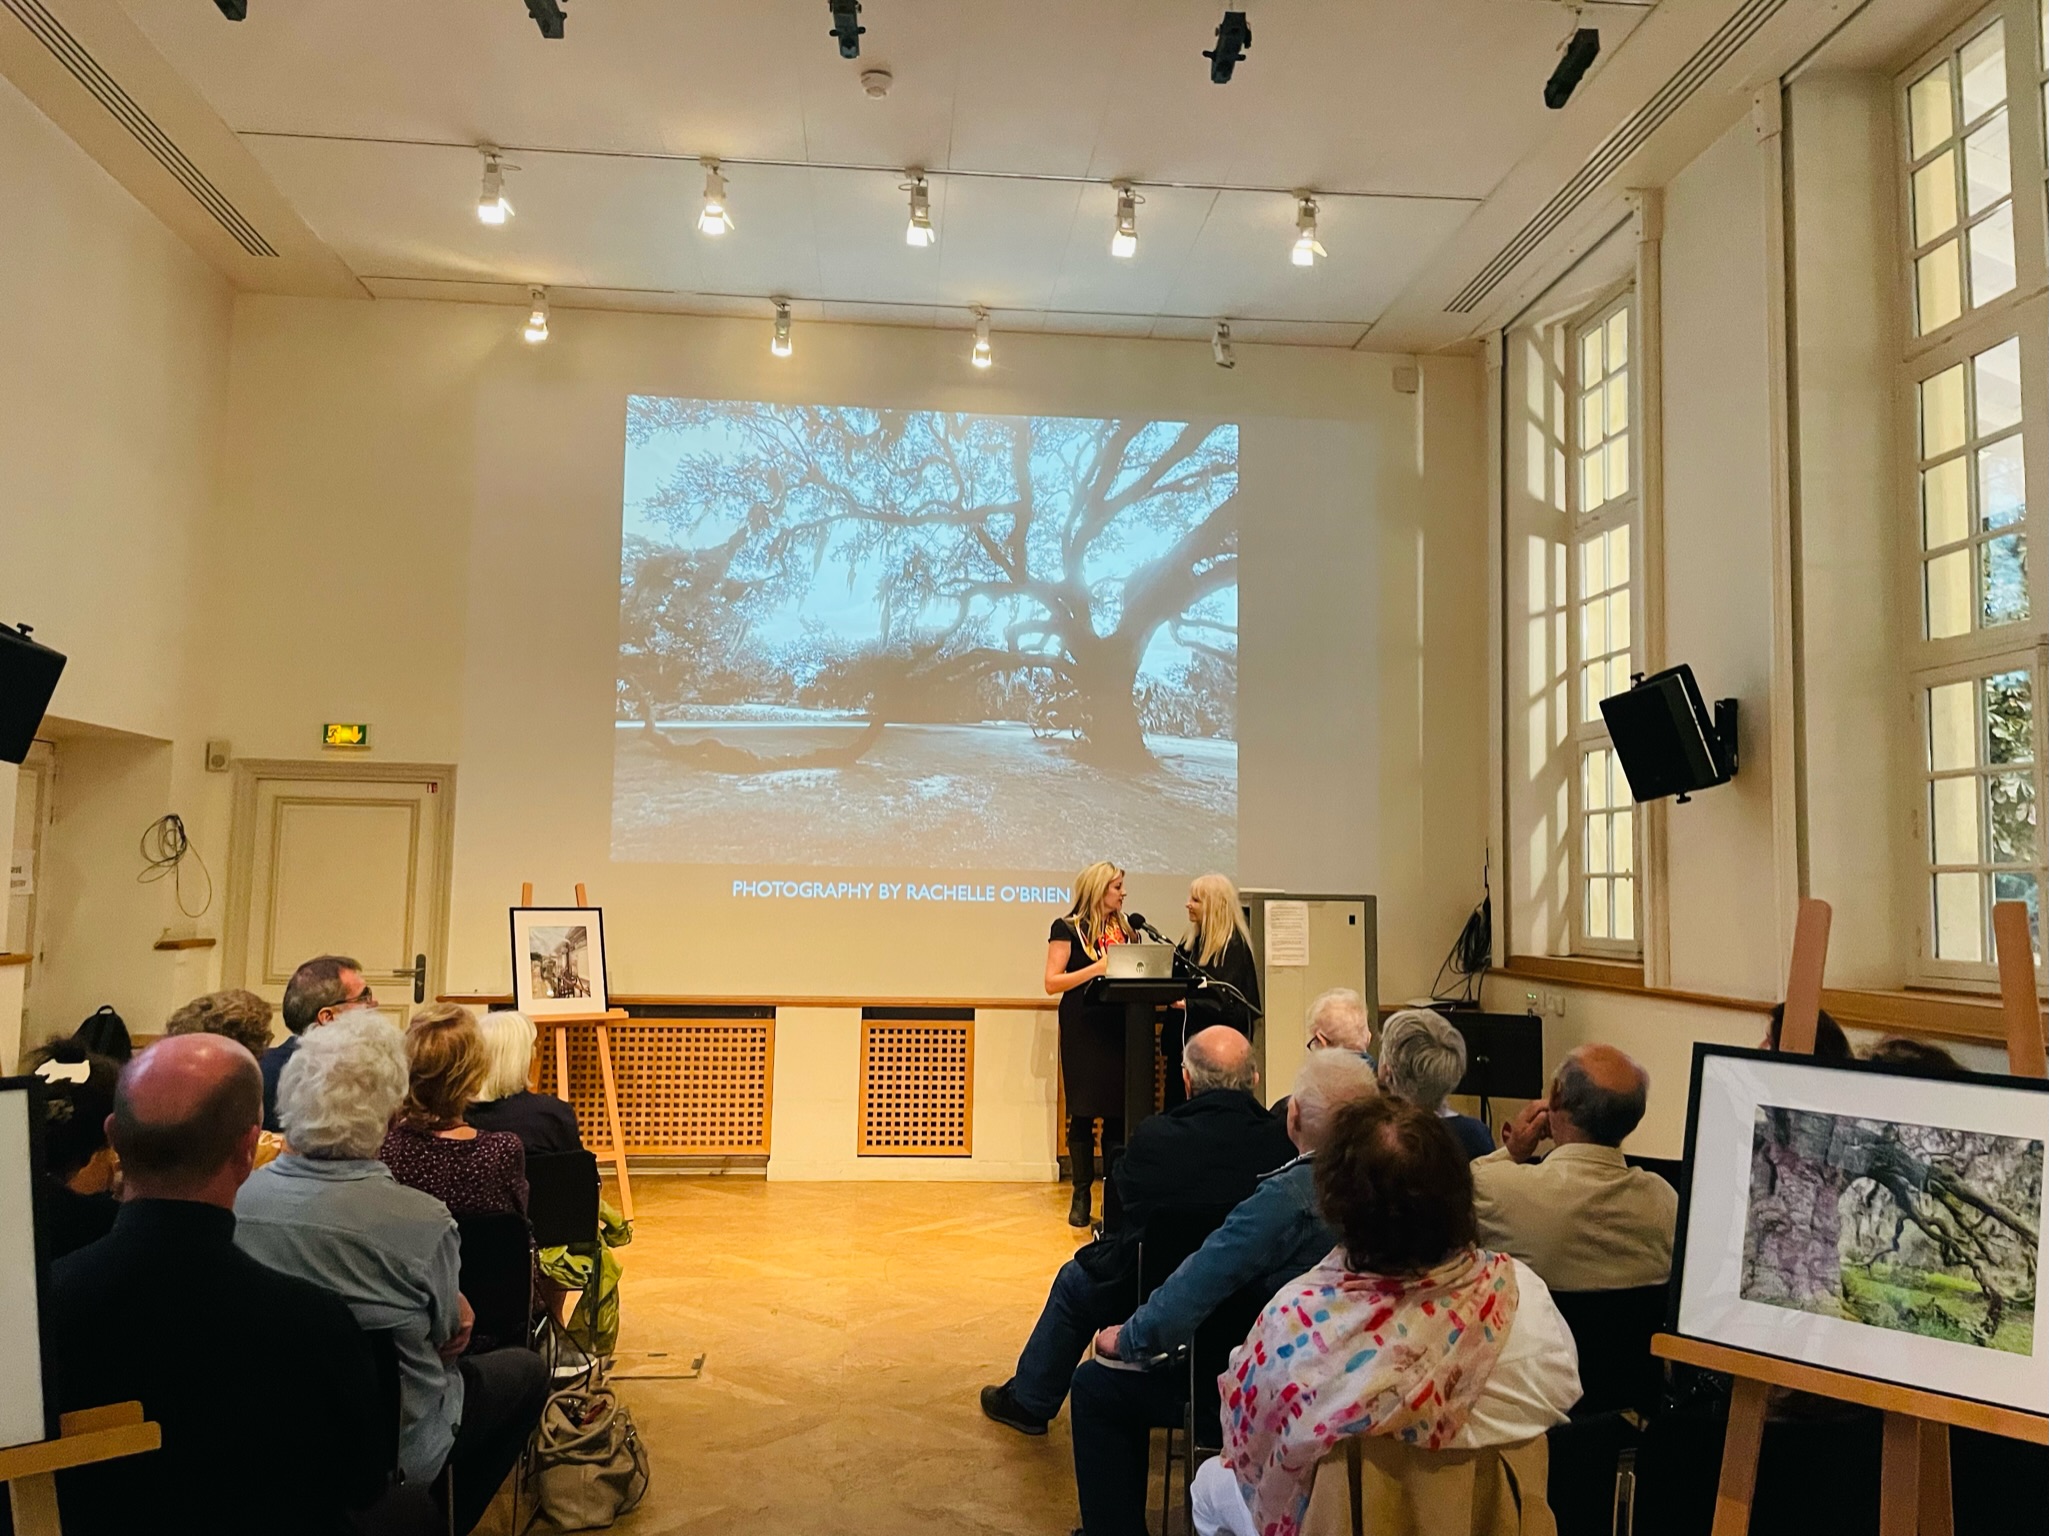 Rosary and Rory speaking to an audience in front of a projection of a large tree